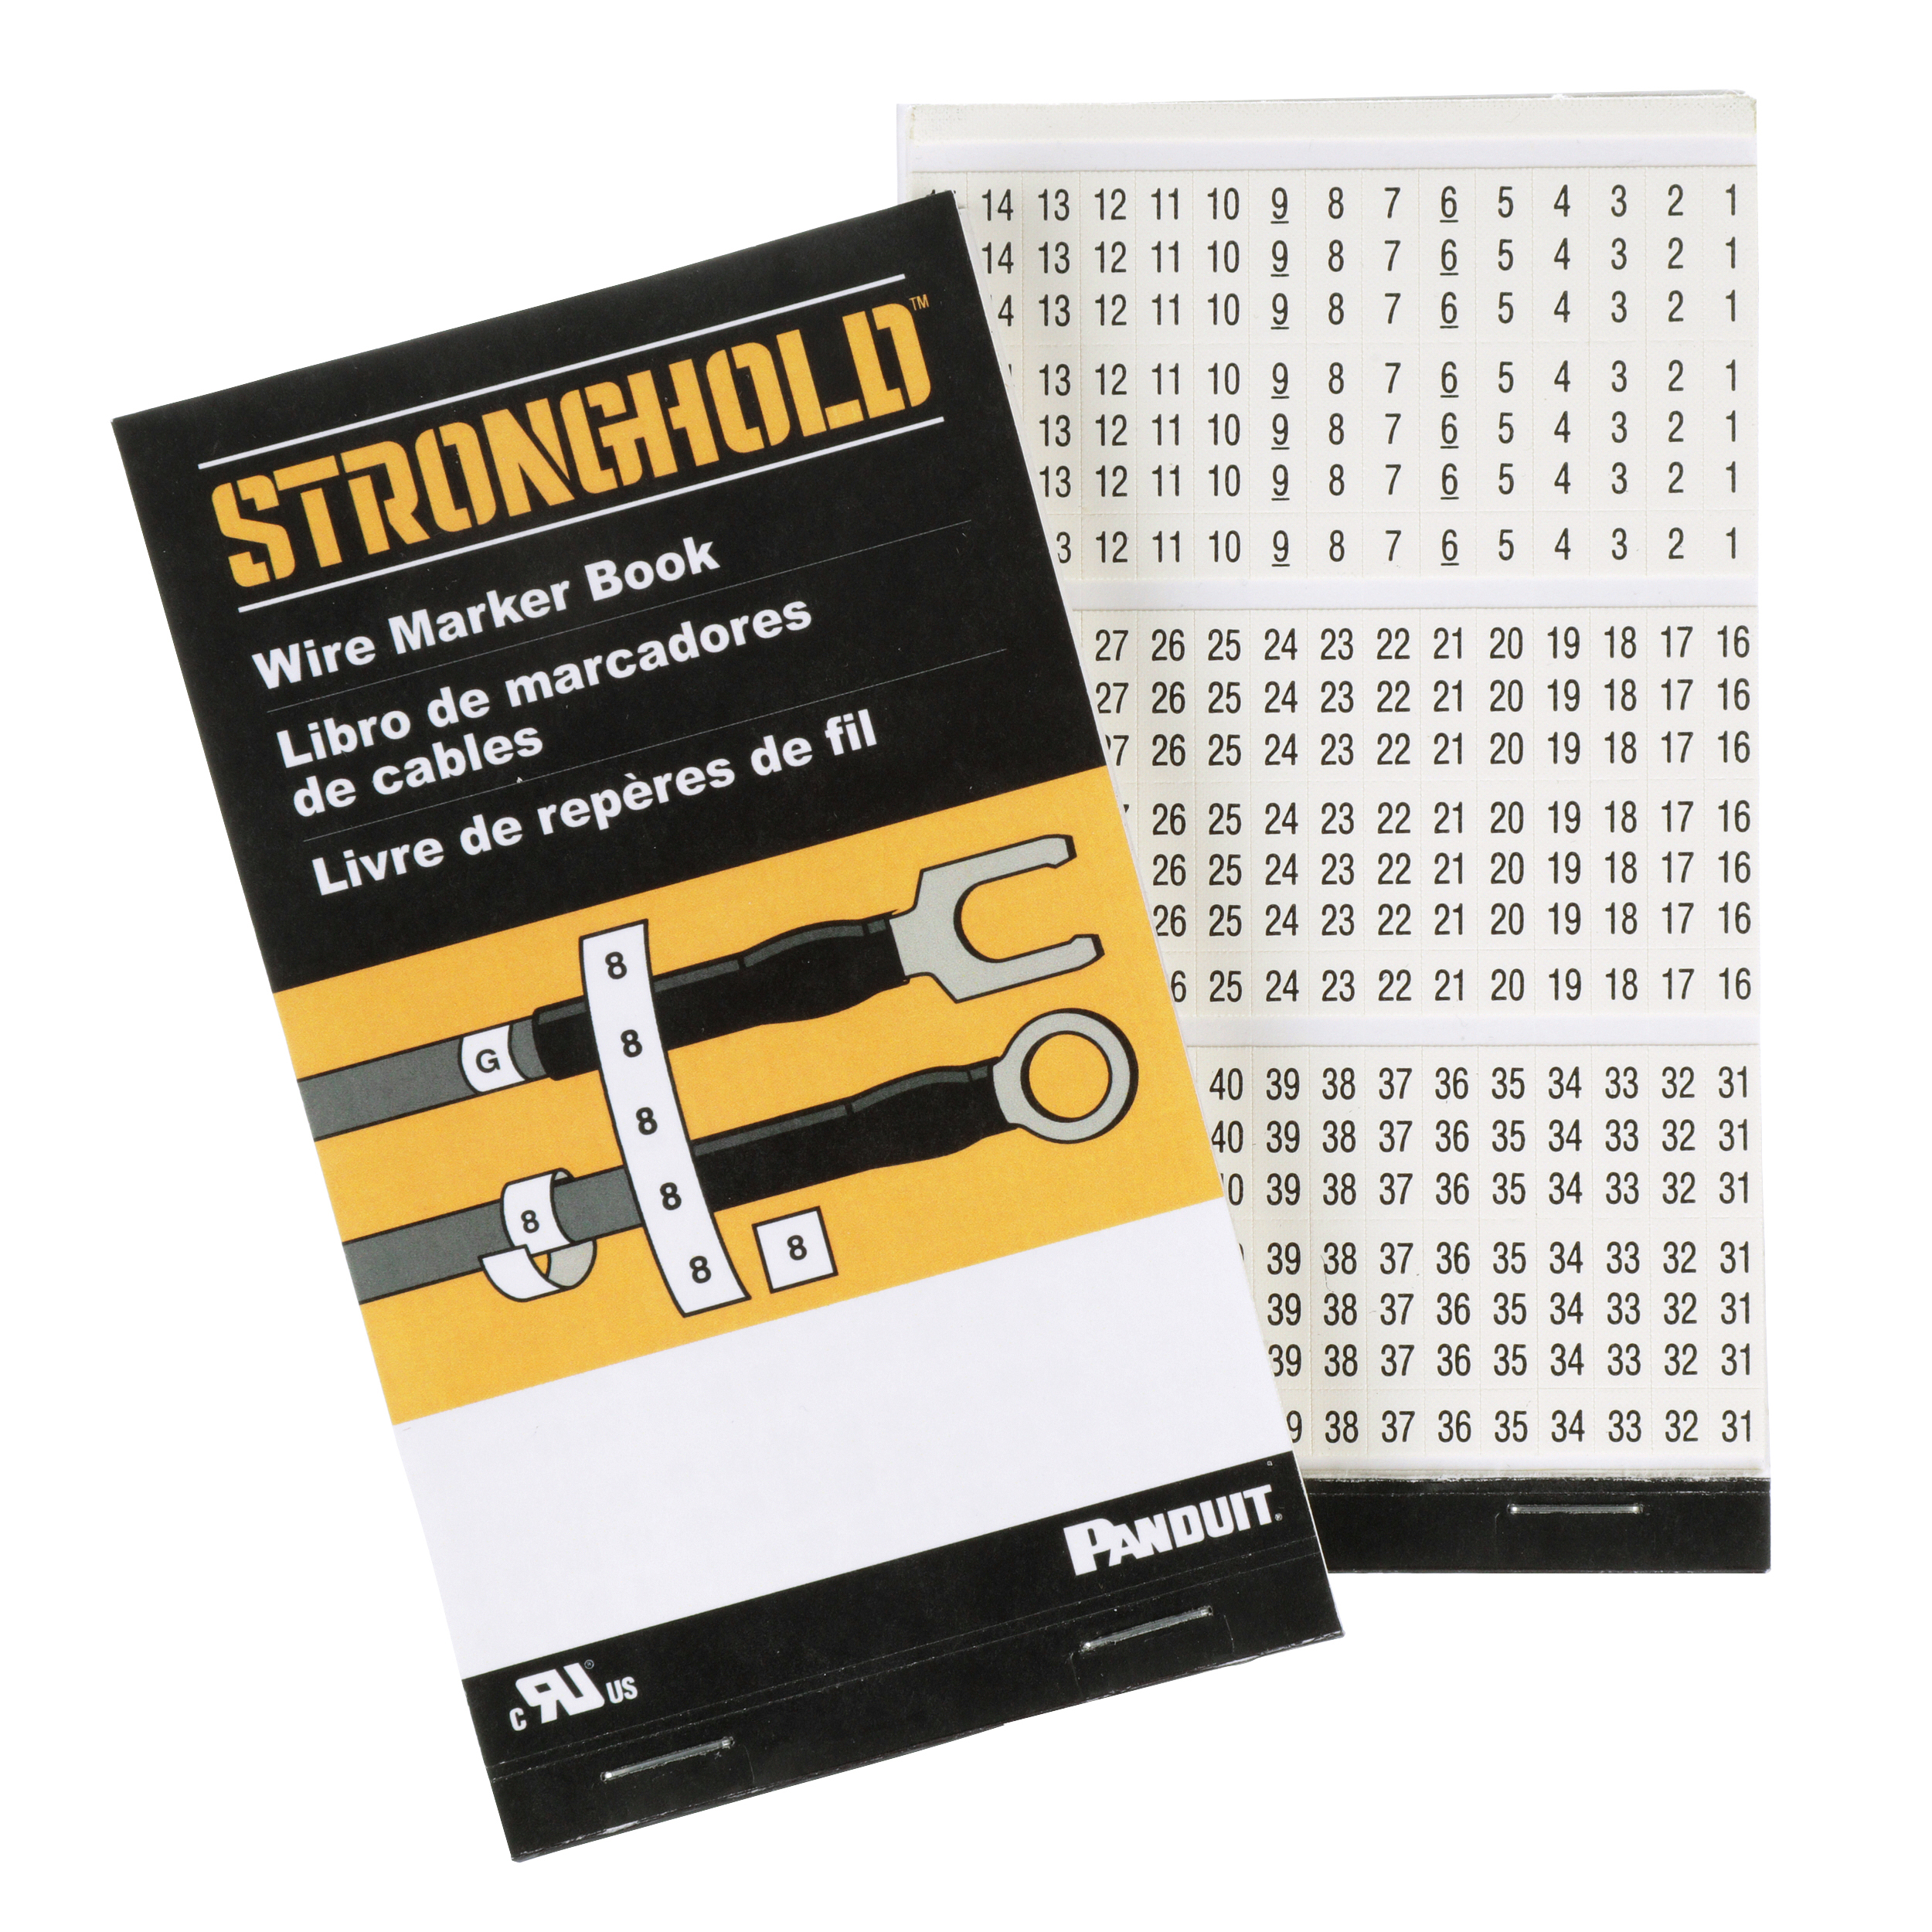 Panduit StrongHold Marker Book